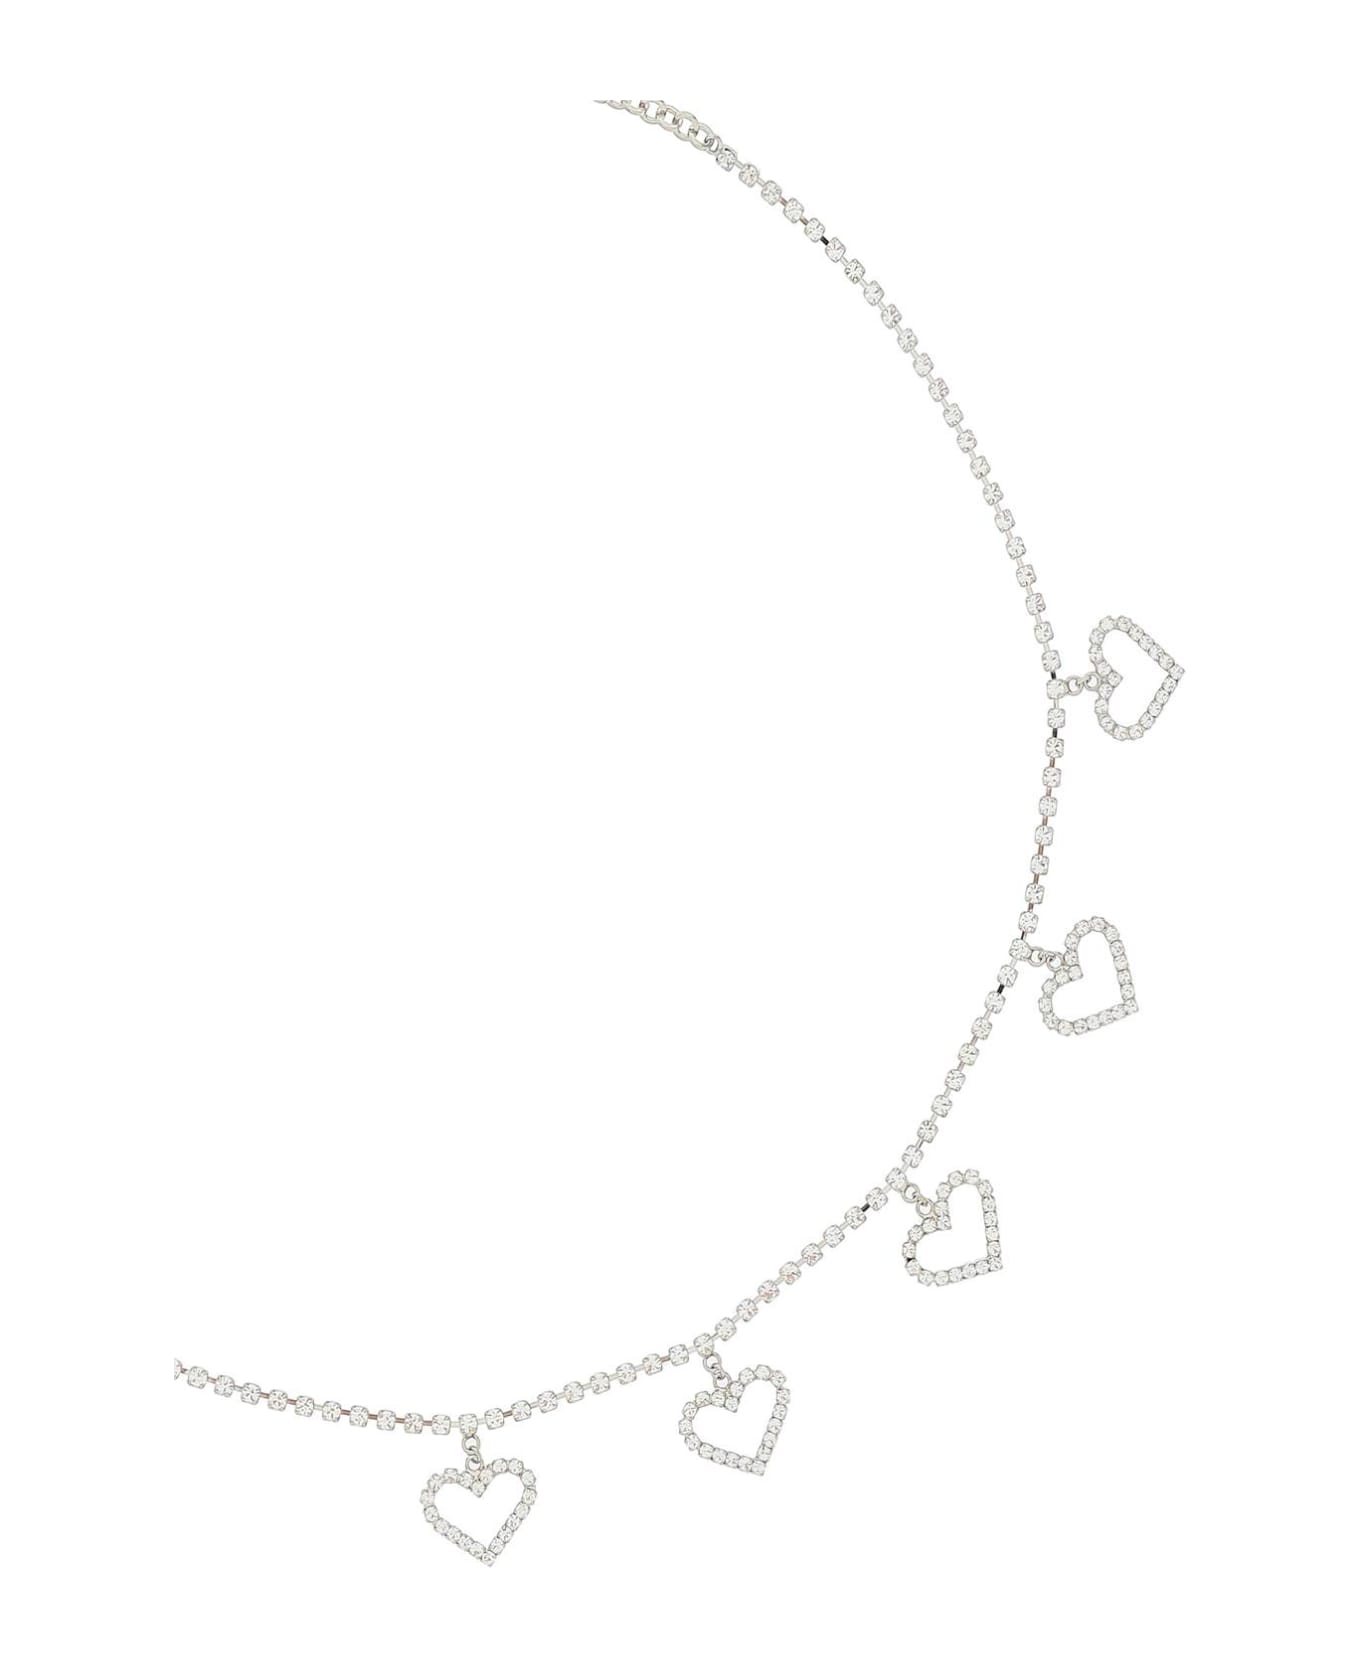 Alessandra Rich Crystal Belt With Heart Pendants - CRYSTAL SILVER (Silver)